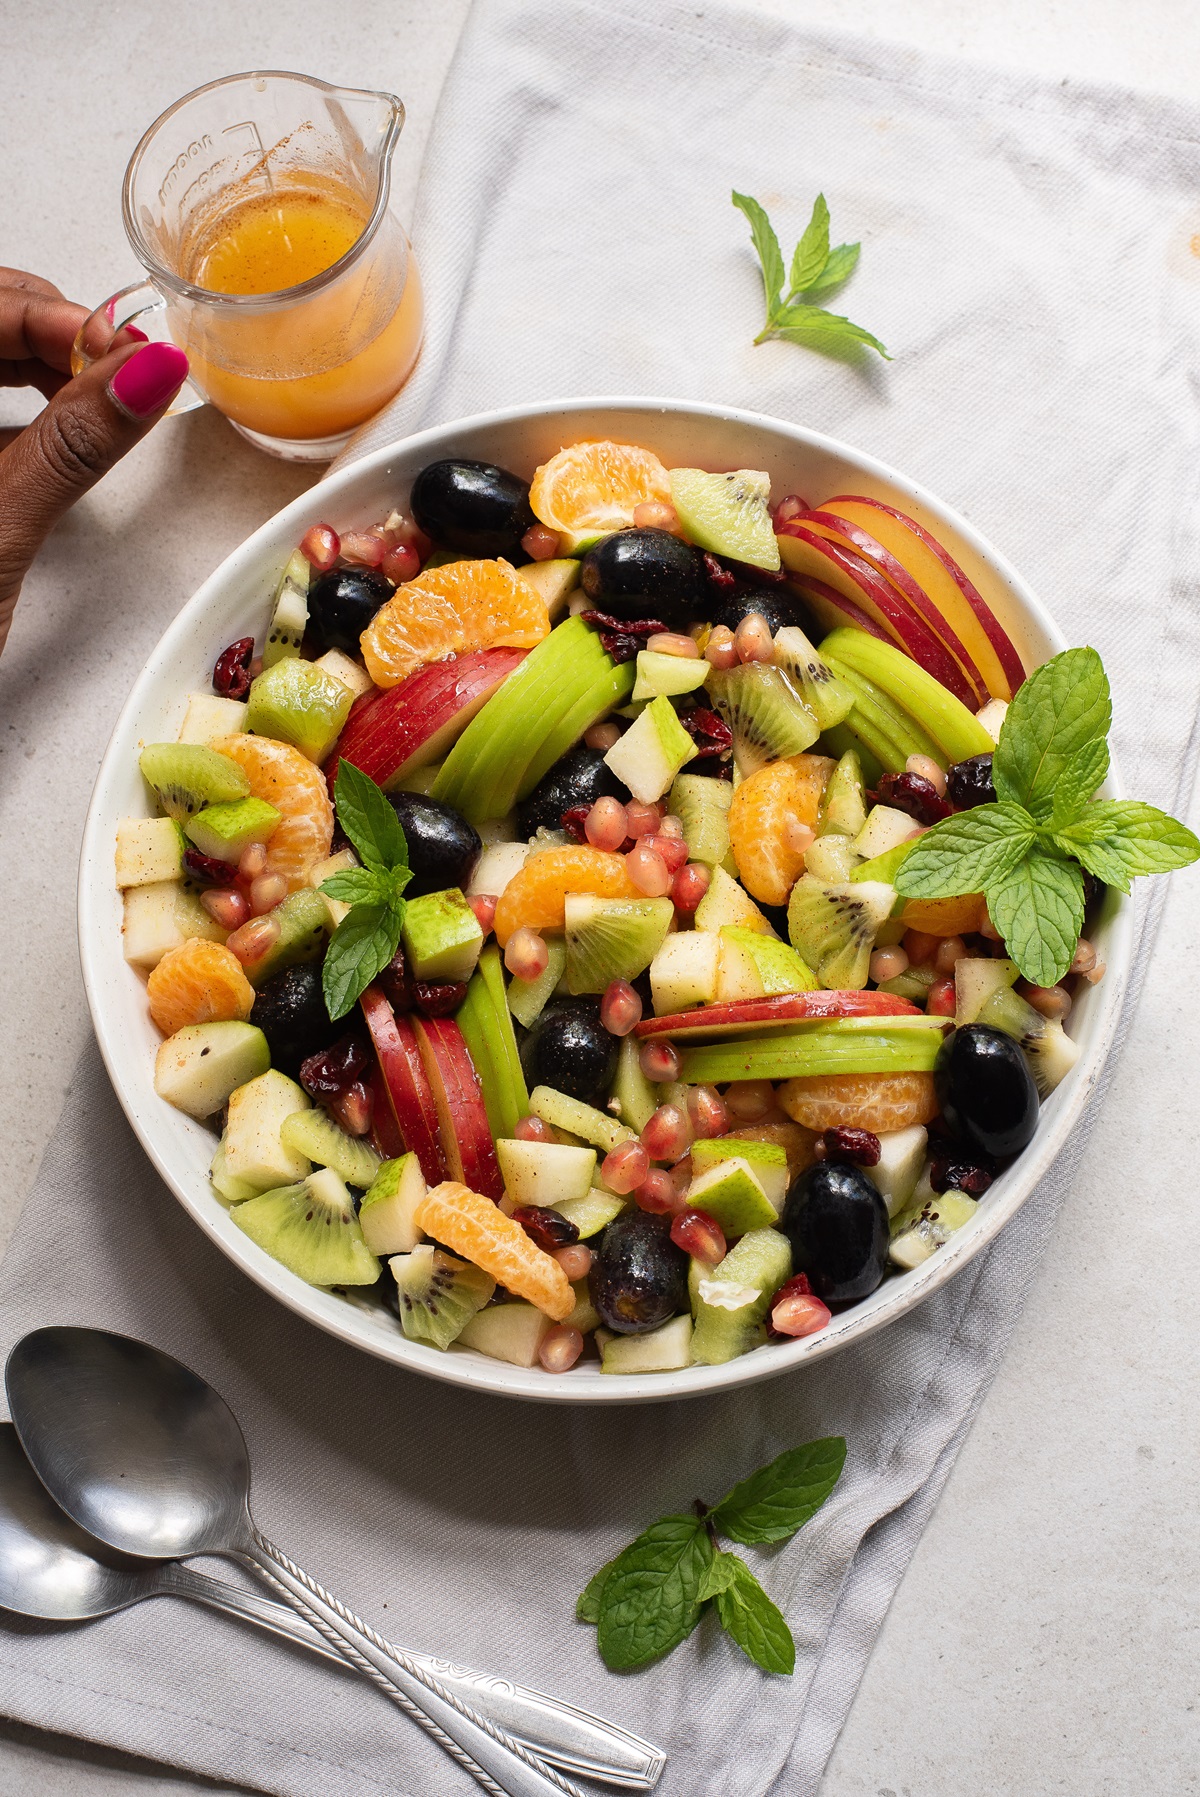 Bowl of fruit with dressing.